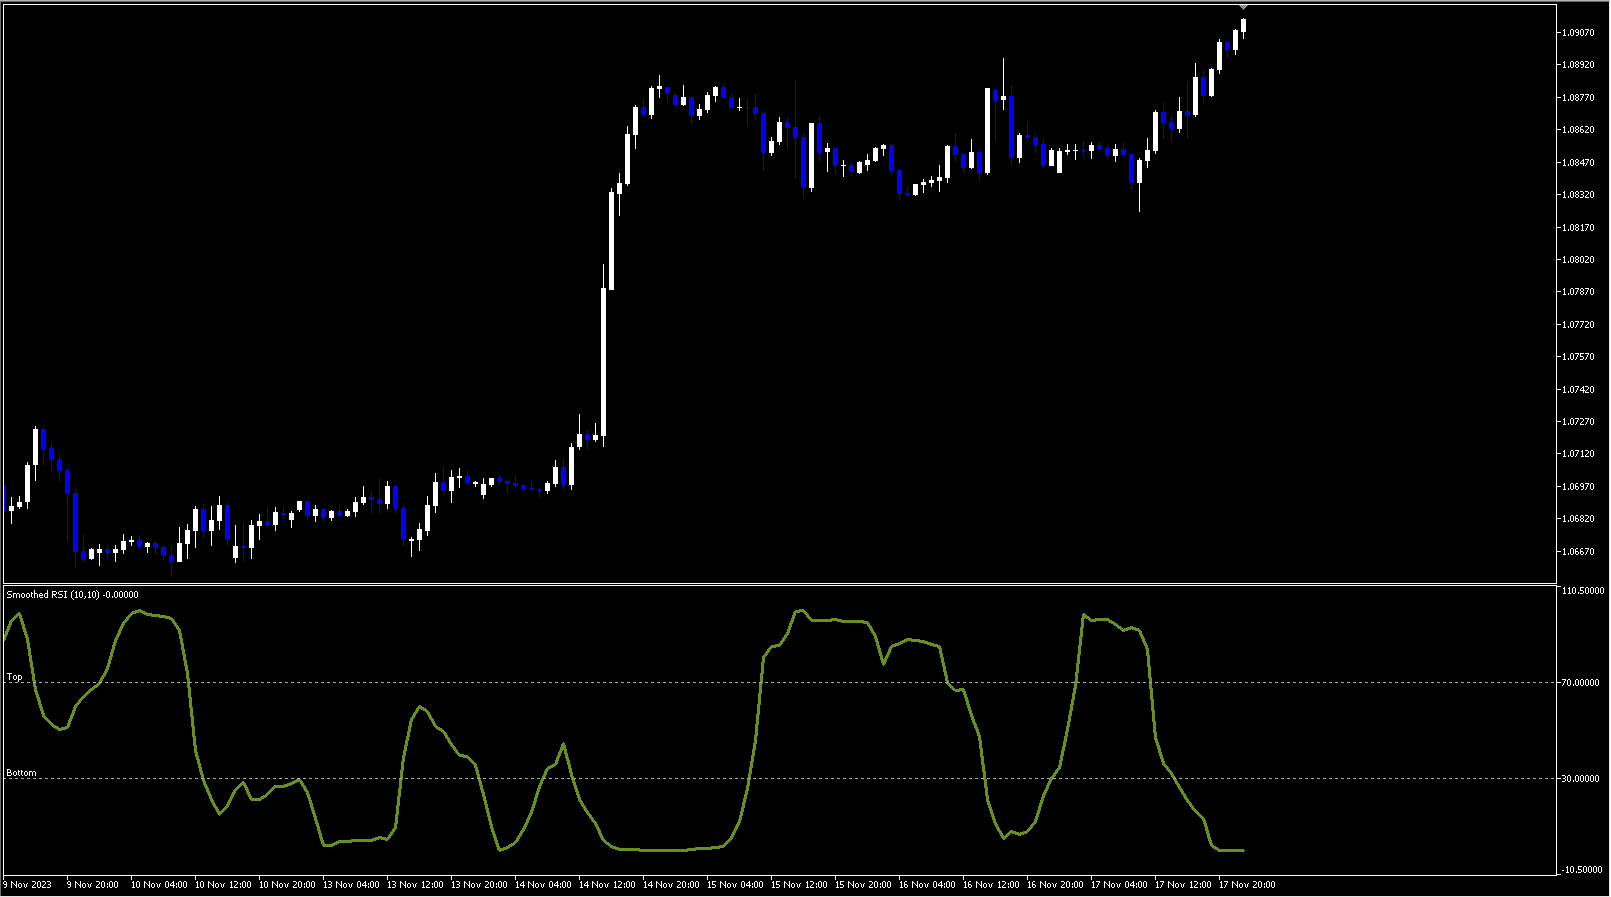 Smoothed RSI Indicator